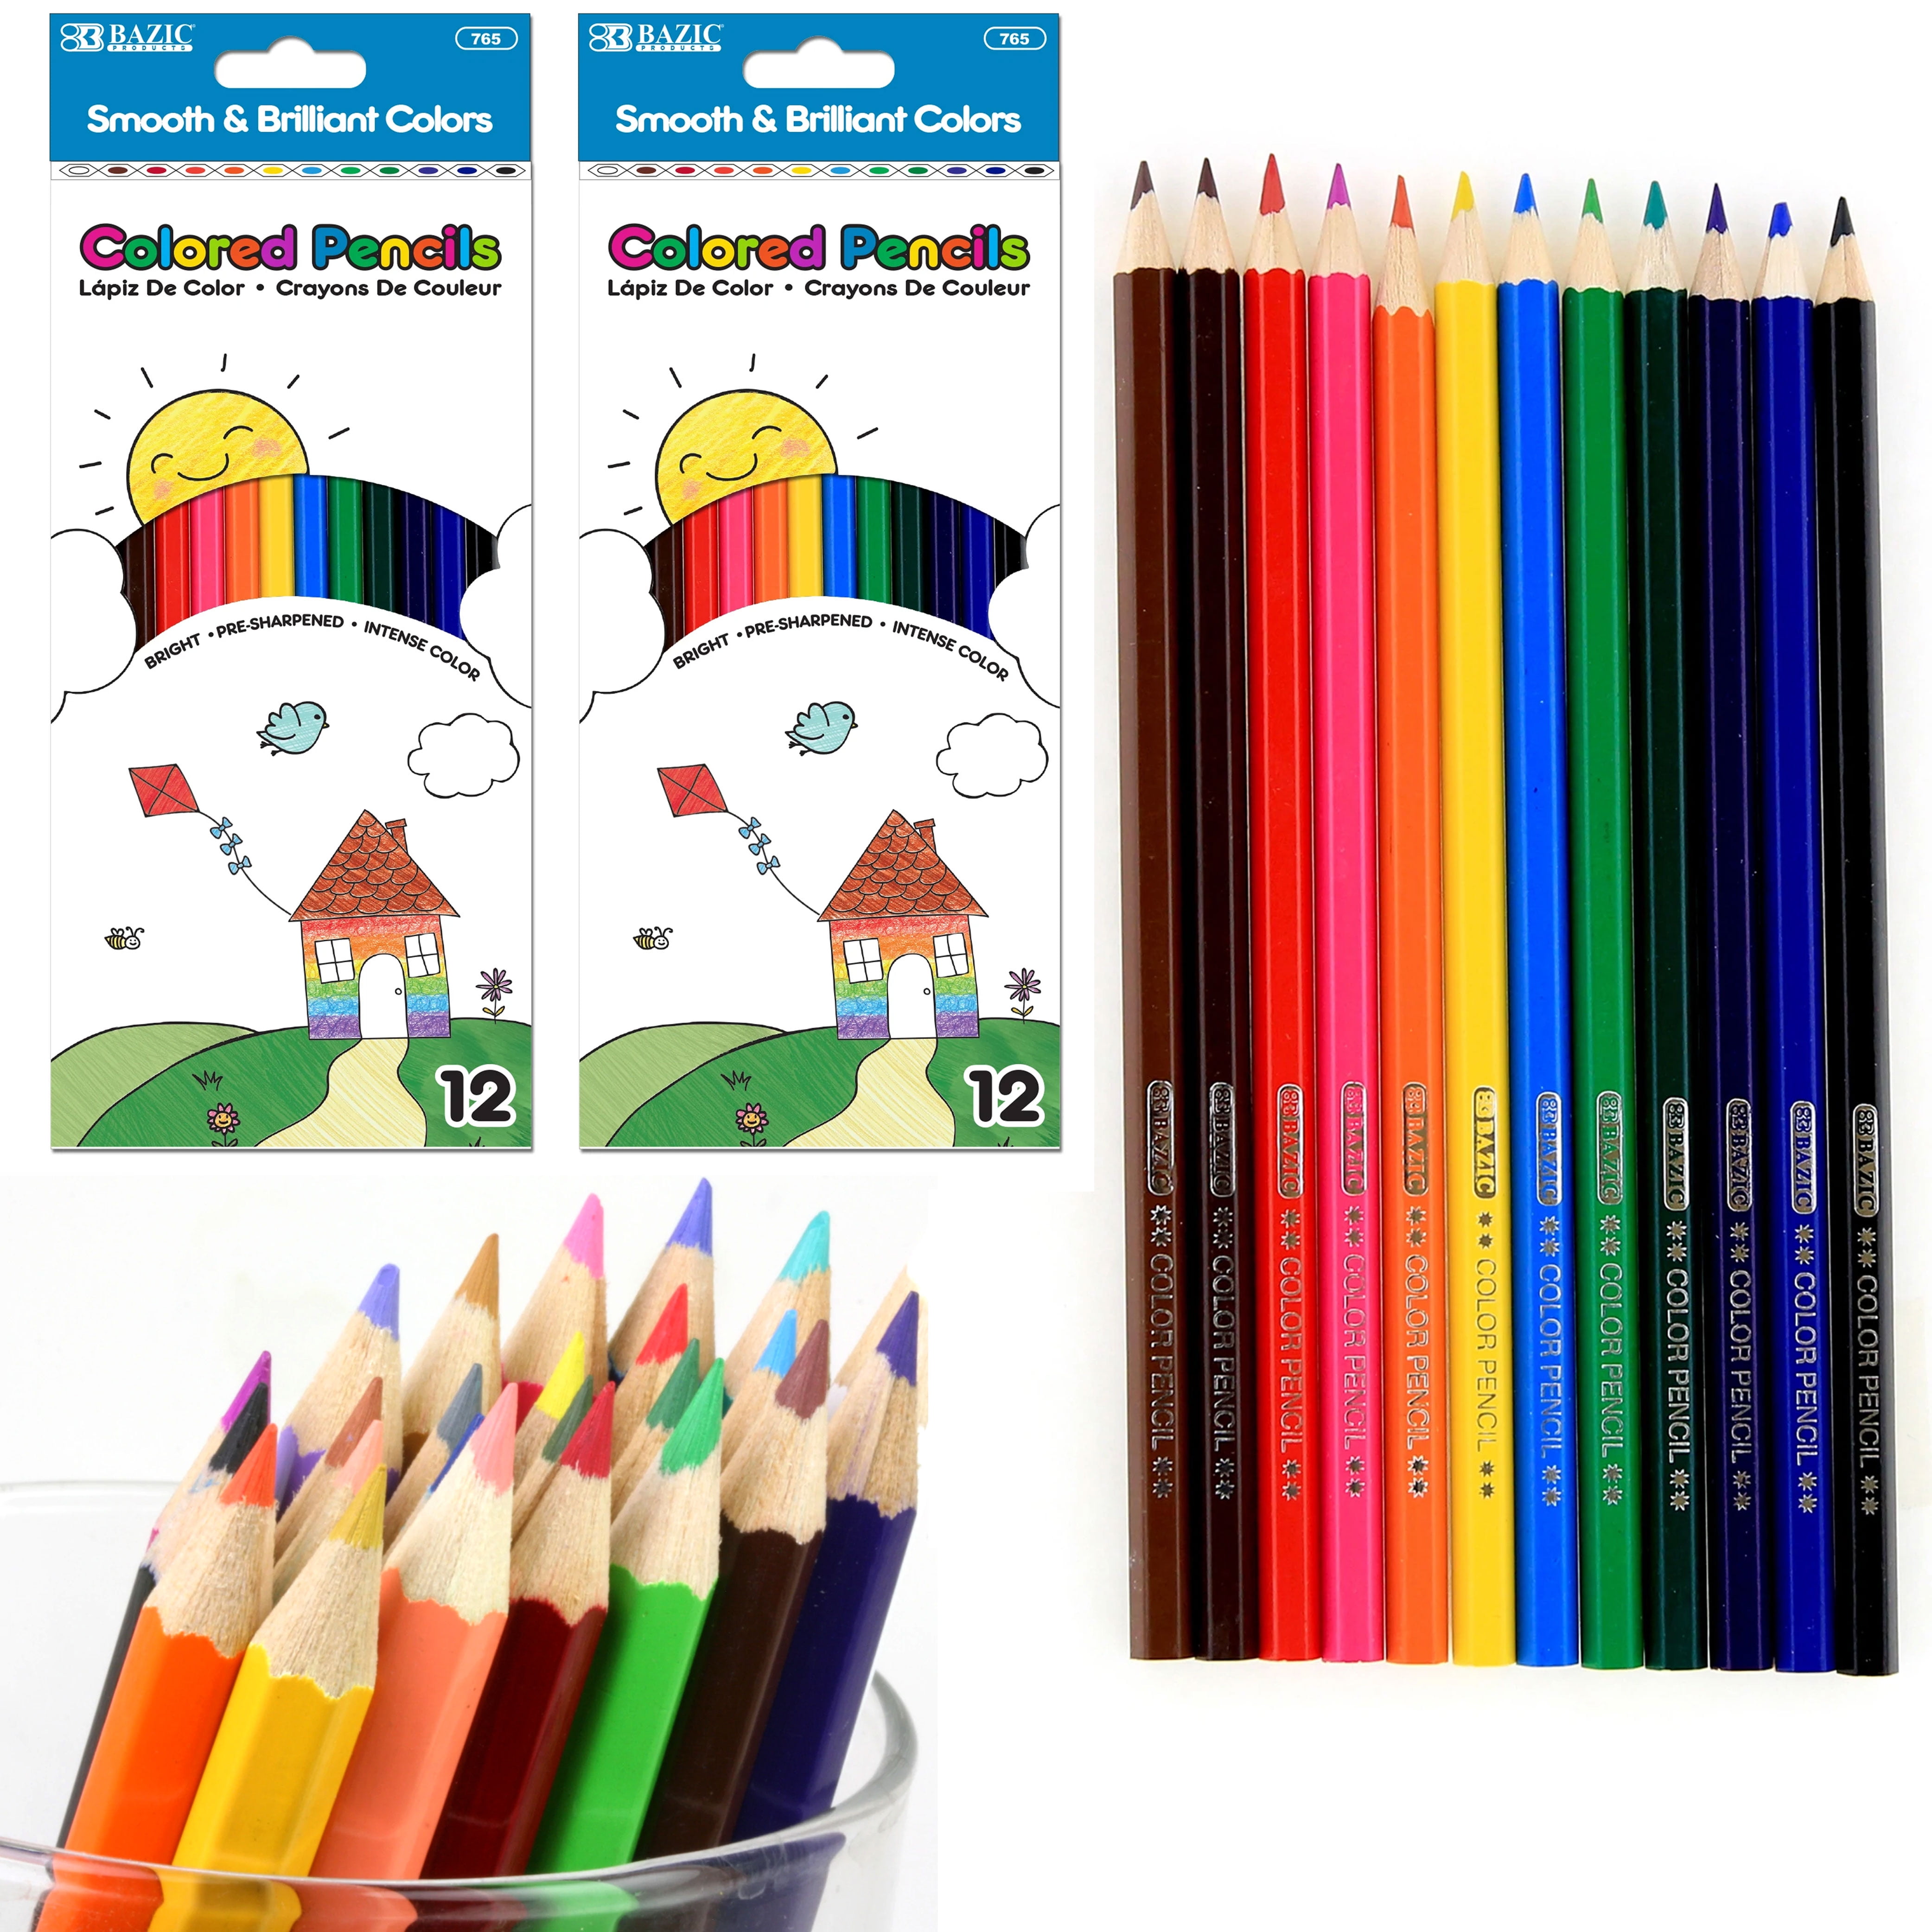 6 Sets of Colored Pencils Children Painting Pencils Portable Mini Coloring Pencils for Writing, Size: 9.00